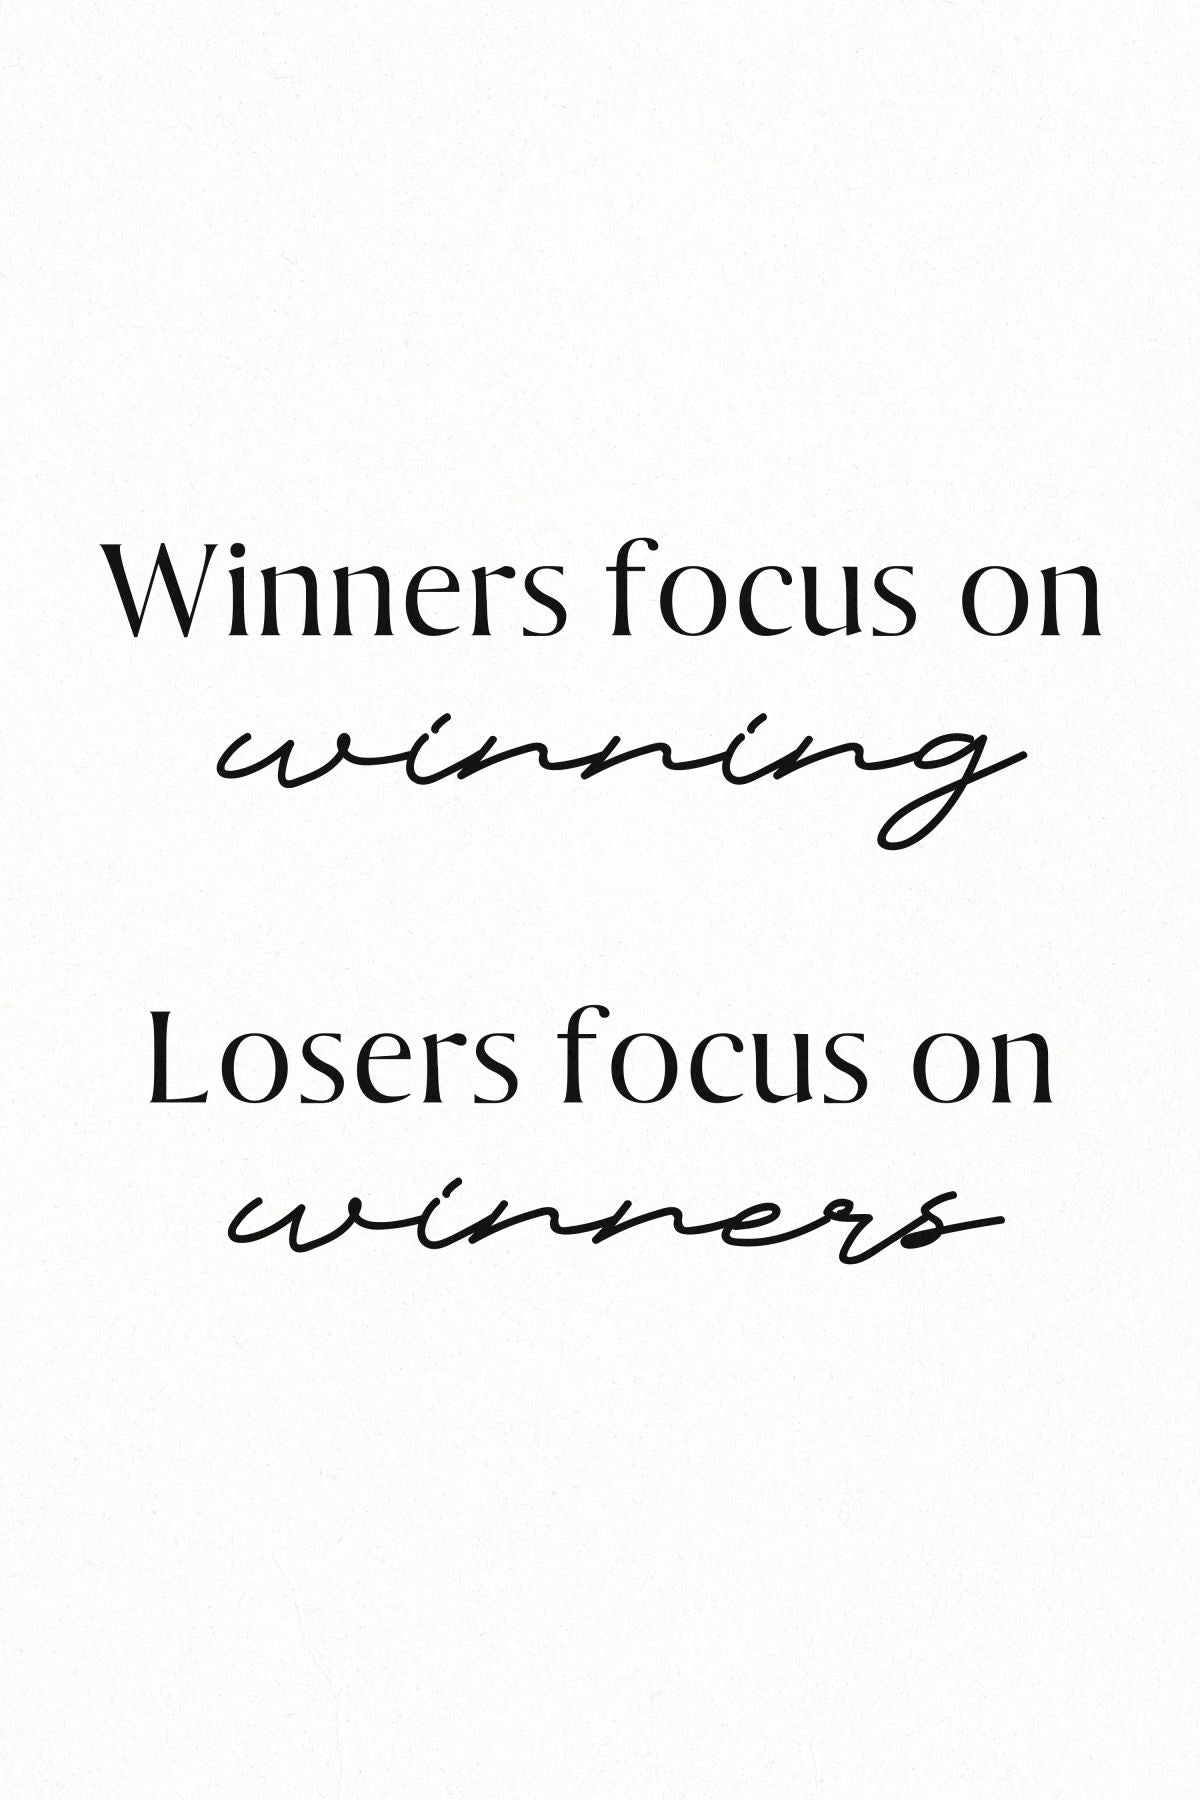 What Separates Winners